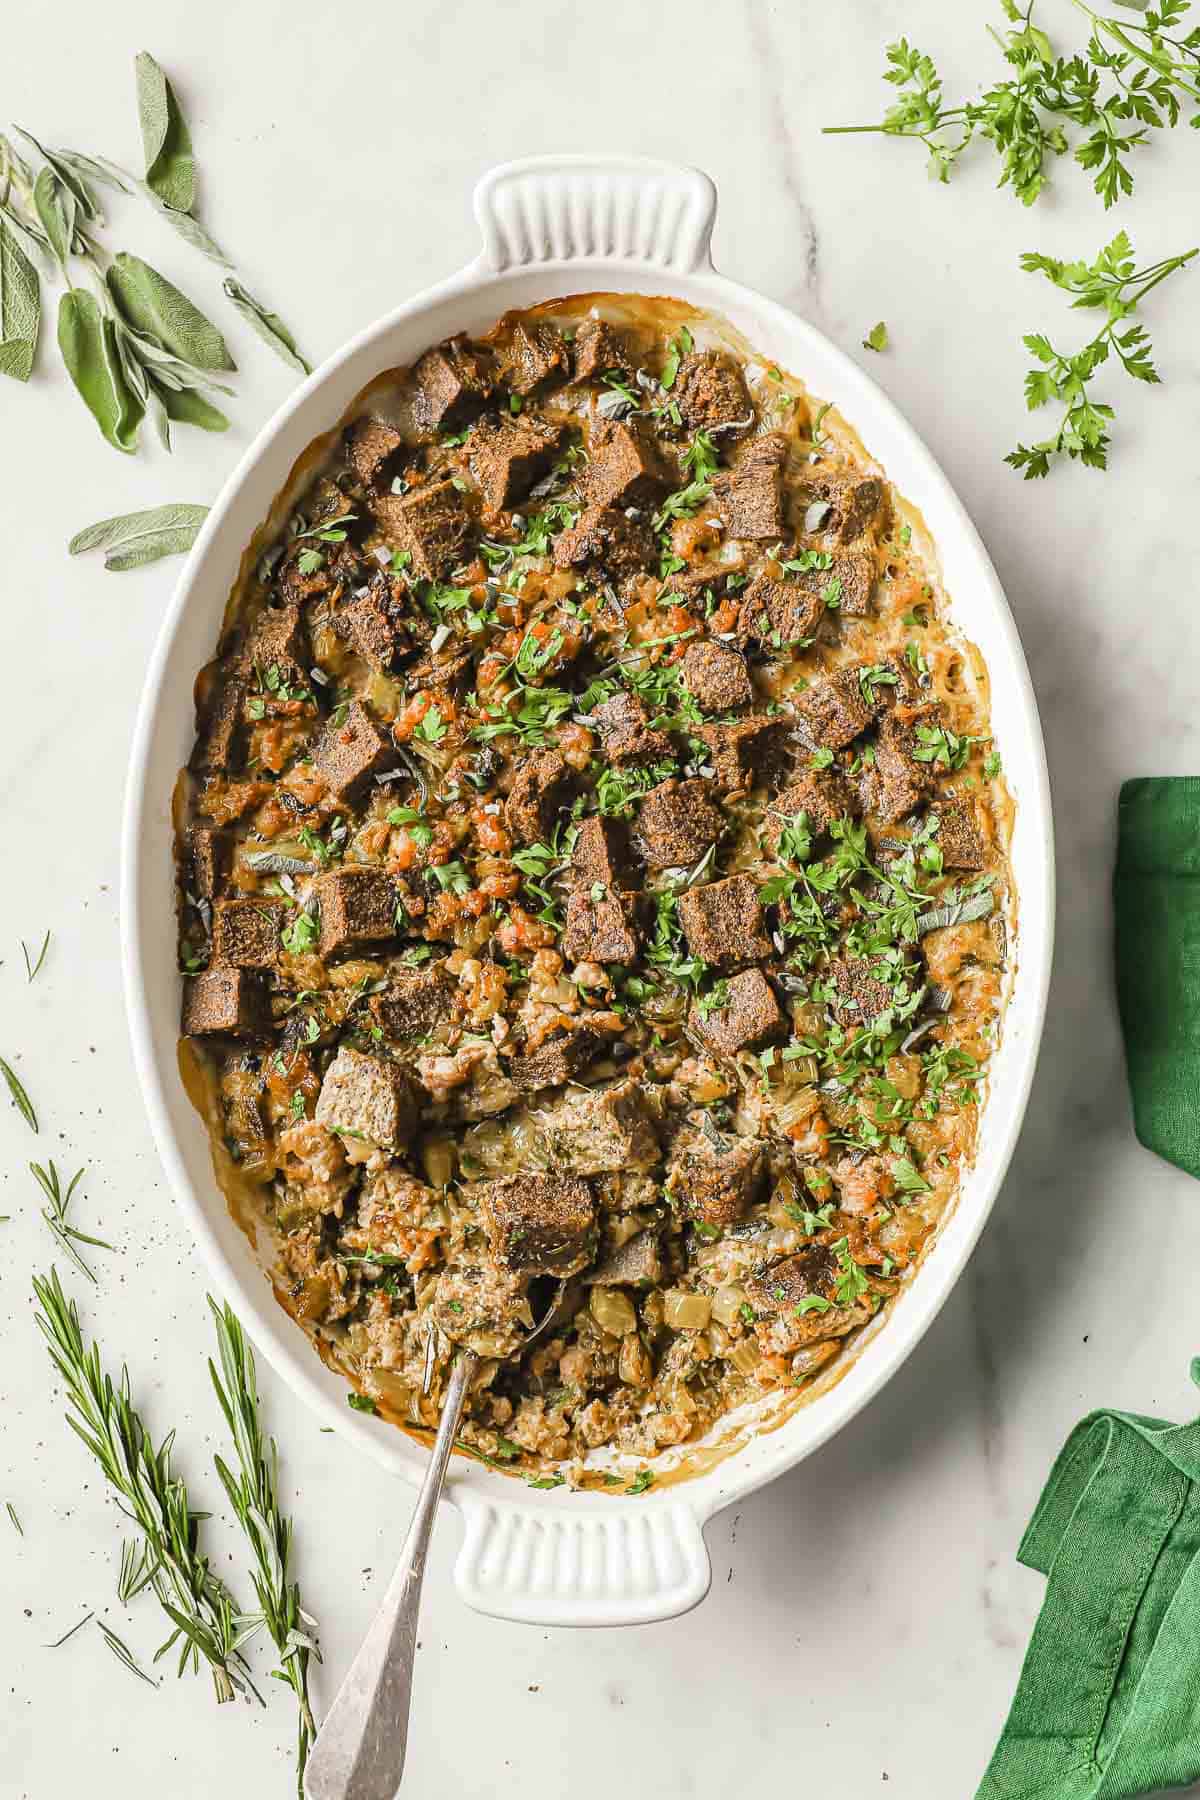 A white casserole dish full of low carb stuffing, made with keto bread, sausage, onion, celery and fresh herbs.